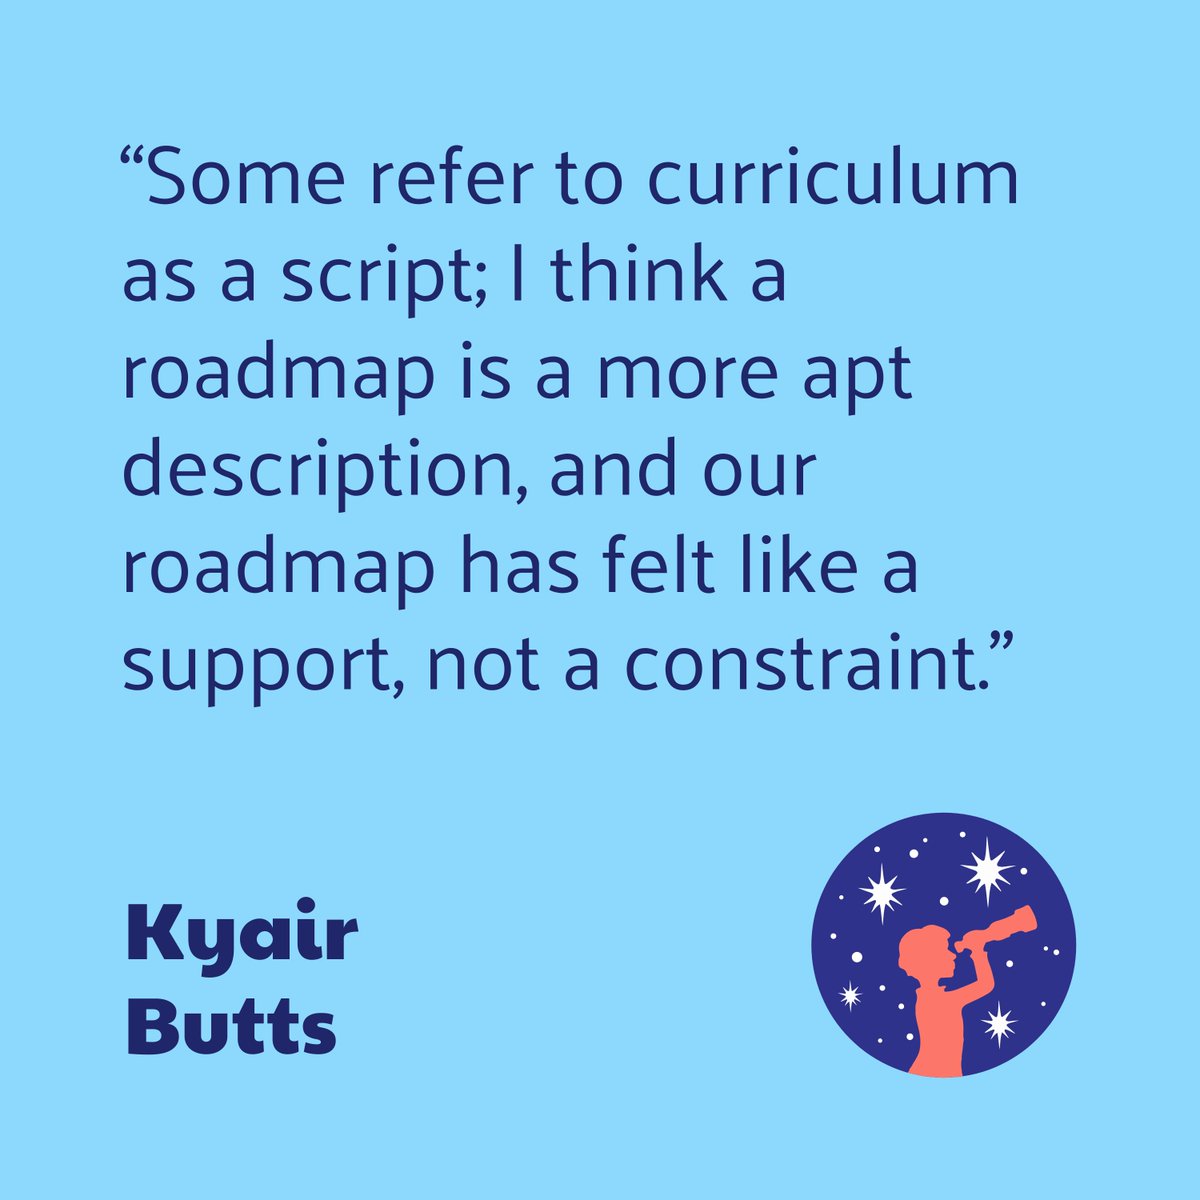 Day 4 of #TeacherAppreciationWeek takes us to @BaltCitySchools and @kyairb sharing words of wisdom and educating students AND educators alike! 💙💜 #ThankATeacher #knowledgematters You can read Kyair’s whole piece here: curriculummatters.org/2020/05/05/cur…